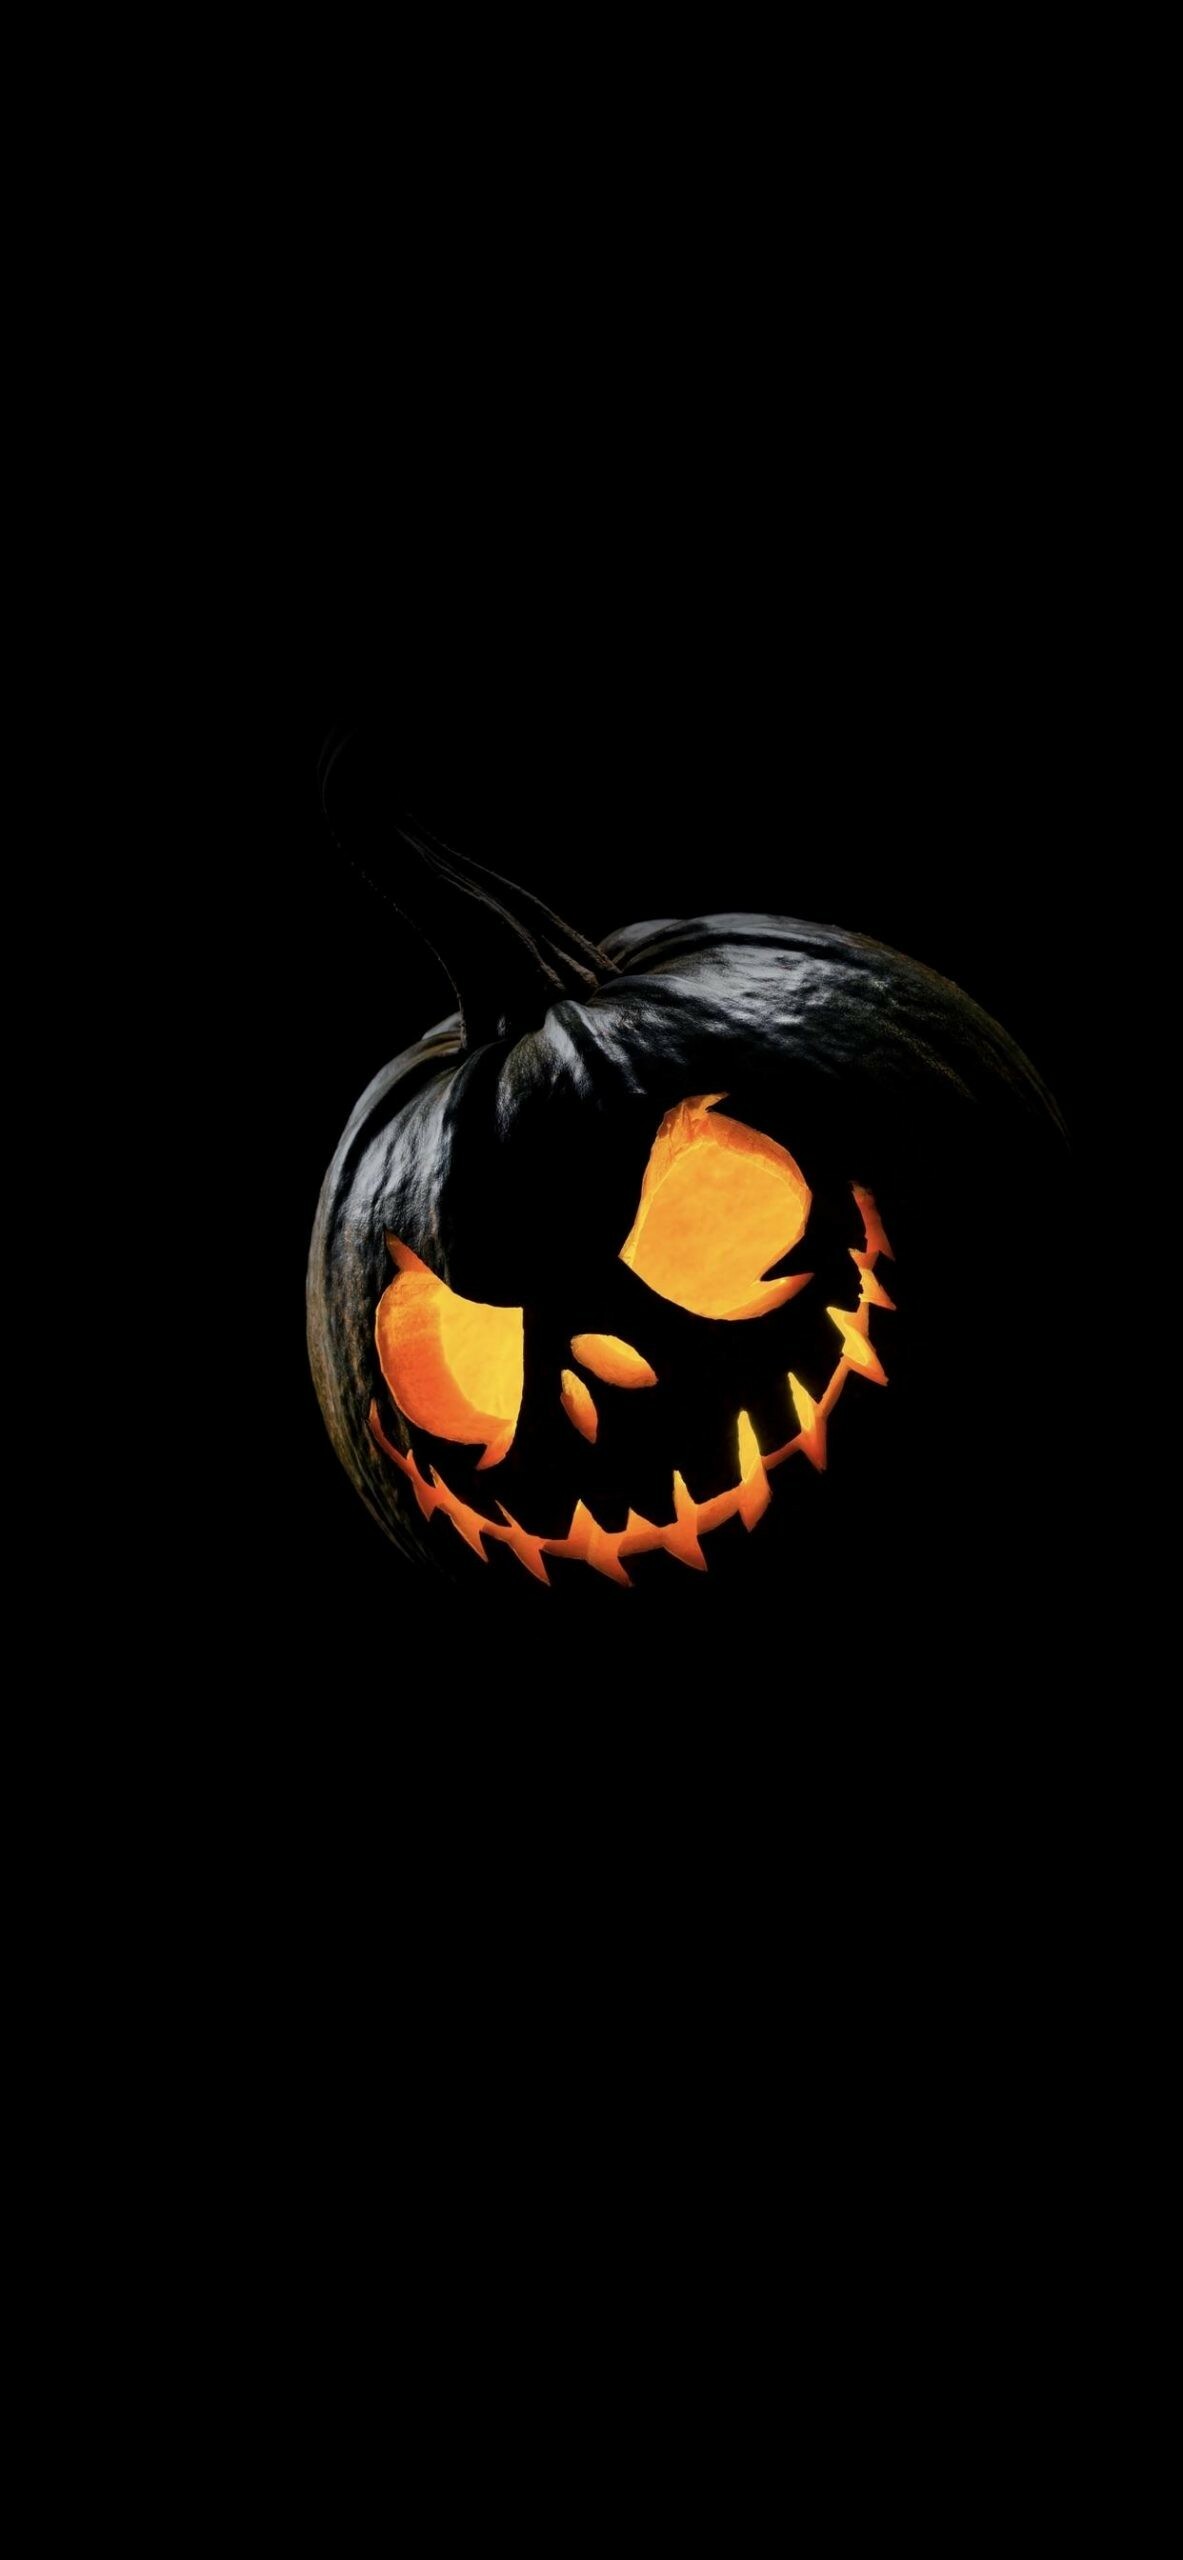 Halloween: It begins the three-day observance of Allhallowtide, Spooky face. 1190x2560 HD Wallpaper.